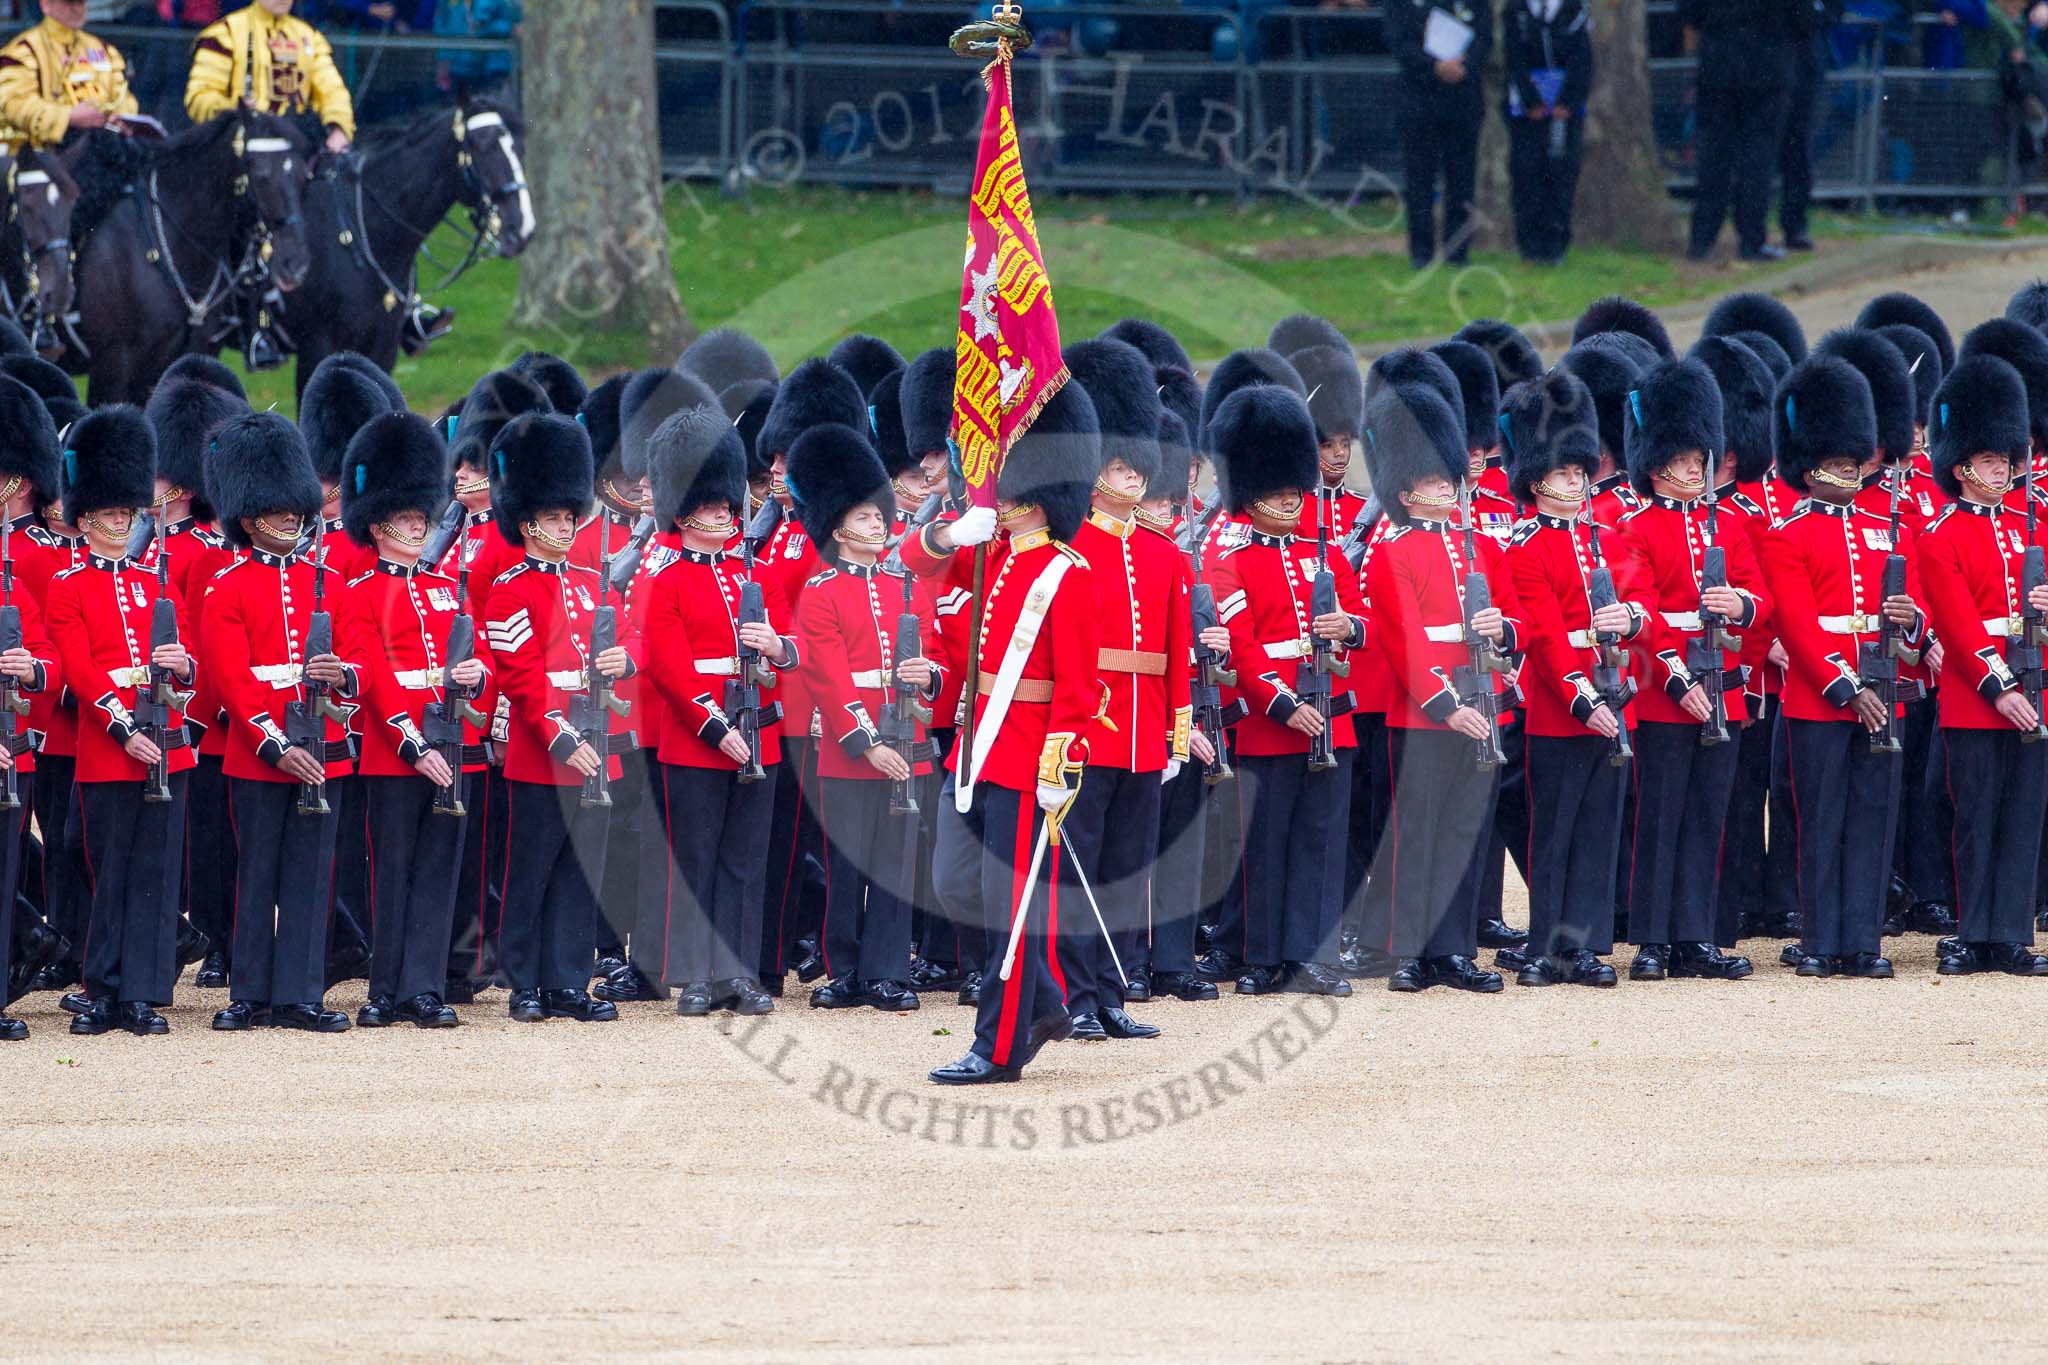 Trooping the Colour 2012: The Ensign, Second Lieutenant Hugo C Codrington, is trooping the Colour along No. 5 Guard, 1st Battalion Irish Guards, whilst the Escort to the Colour, No. 1 Guard, is marching between the two lines of guardsmen..
Horse Guards Parade, Westminster,
London SW1,

United Kingdom,
on 16 June 2012 at 11:26, image #346